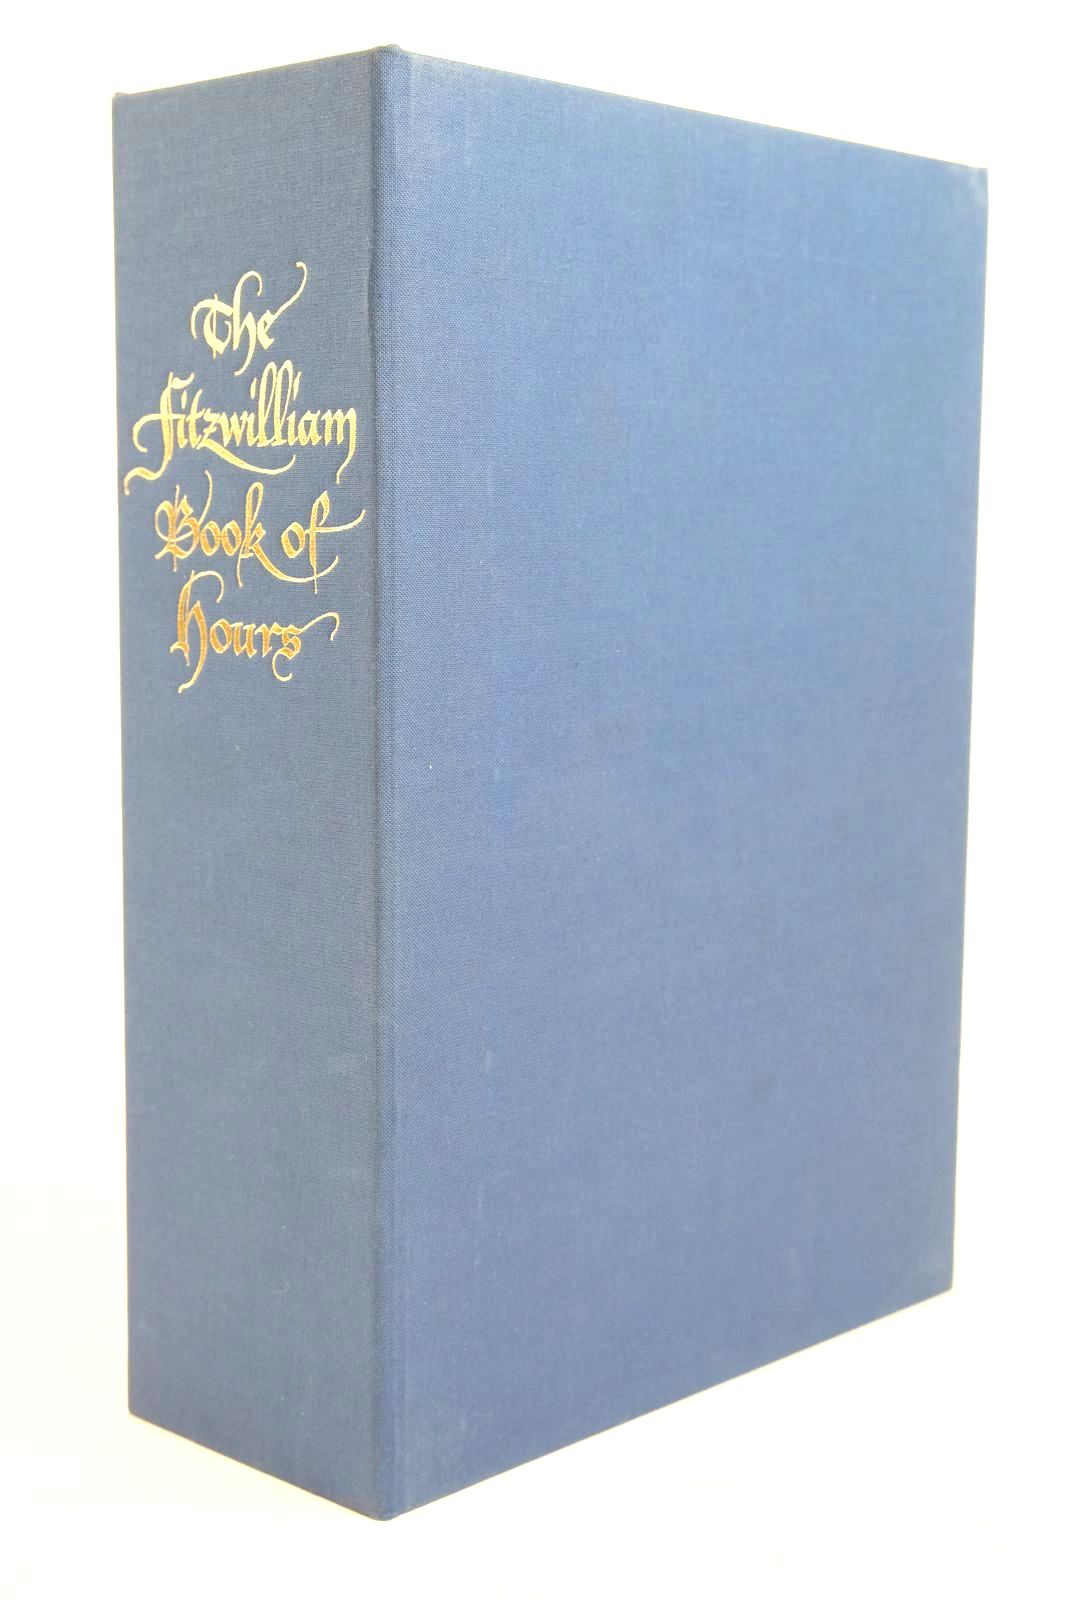 Photo of THE FITZWILLIAM BOOK OF HOURS written by Panayotova, Stella published by Folio Society (STOCK CODE: 1320941)  for sale by Stella & Rose's Books